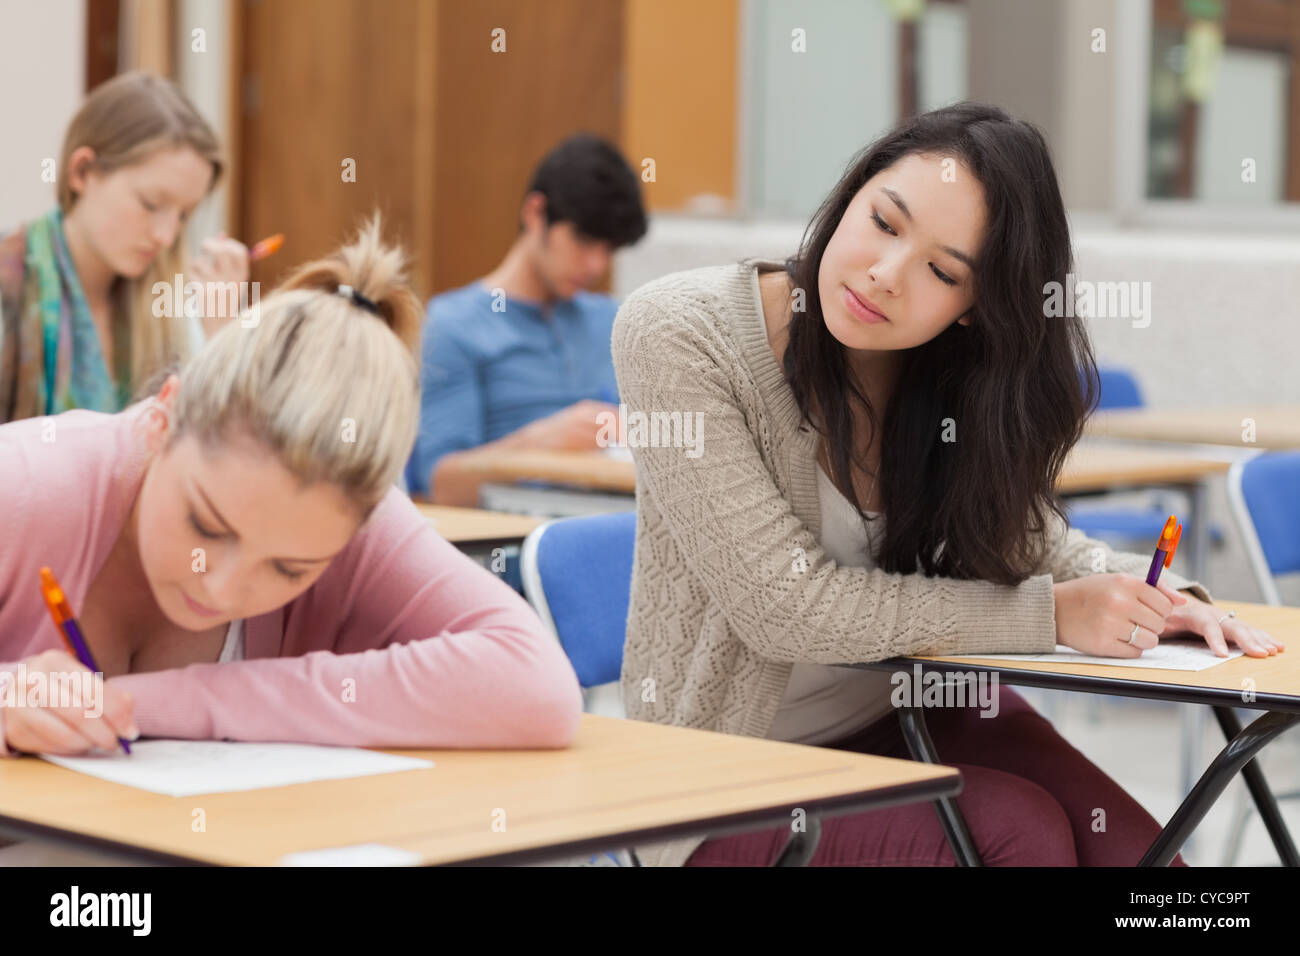 Girl copying another students work in exam Stock Photo